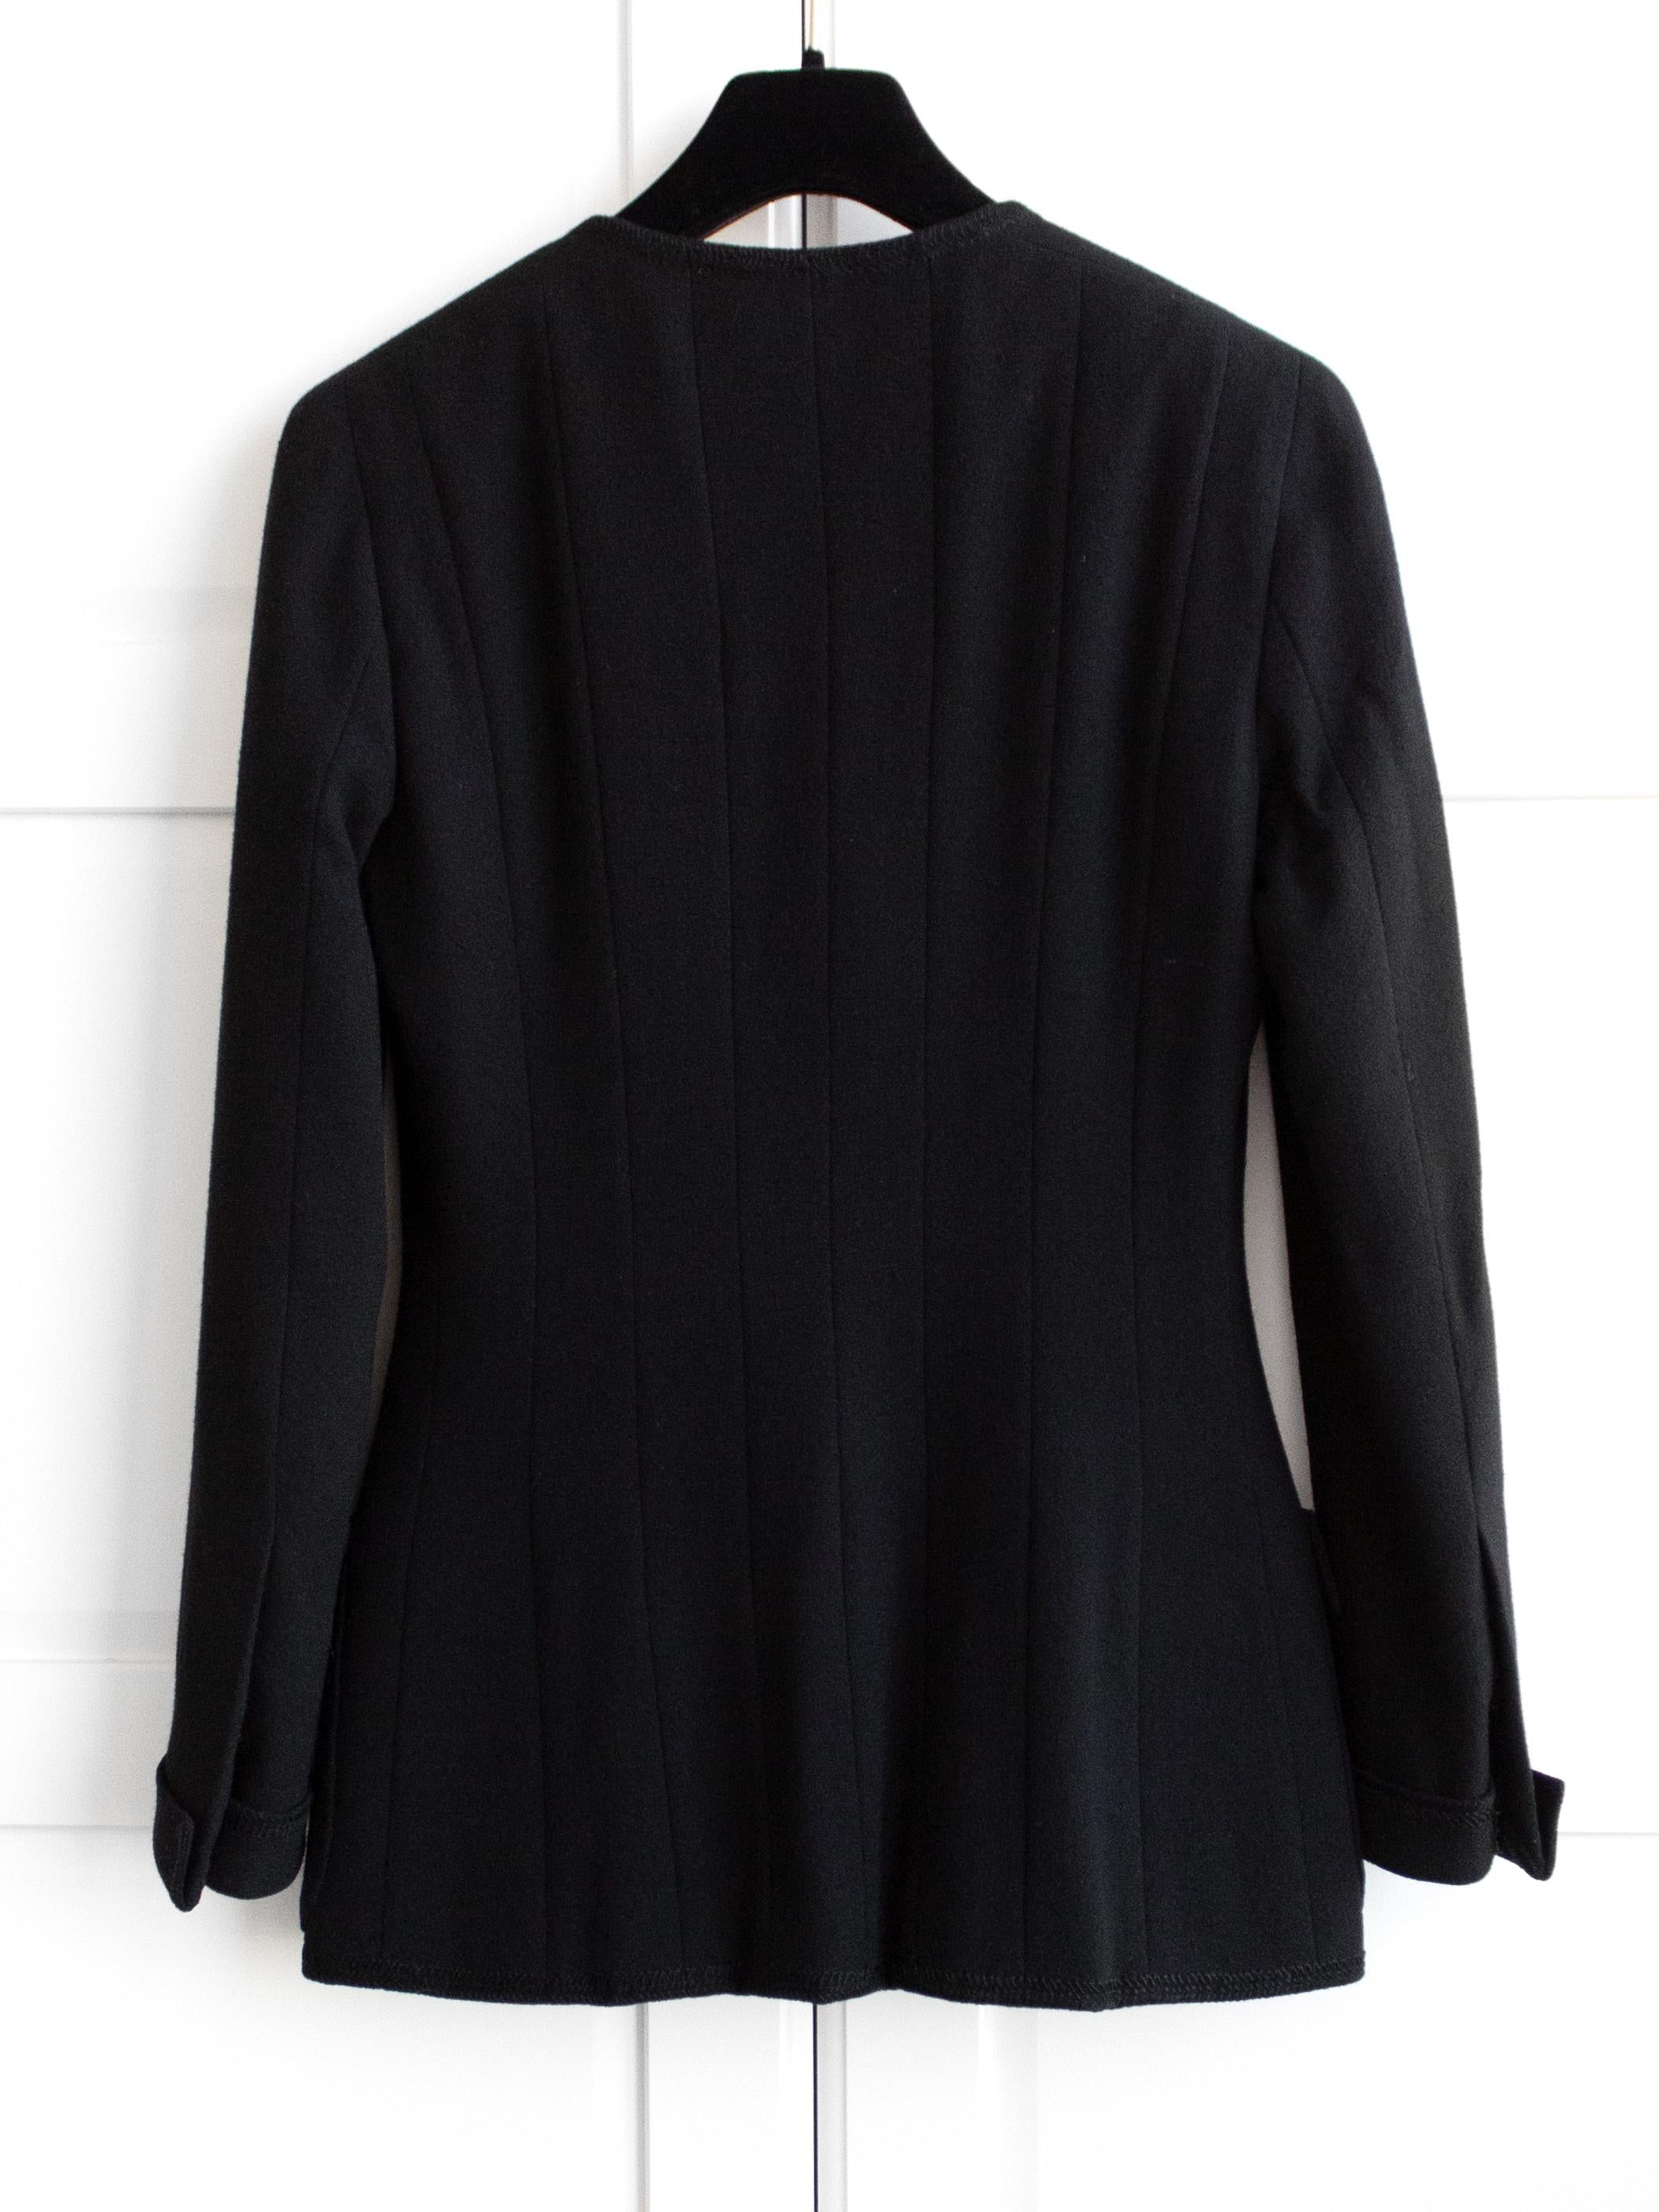 Chanel Vintage Haute Couture Spring/Summer 1996 Classic LBJ Black Blazer Jacket In Good Condition For Sale In Jersey City, NJ